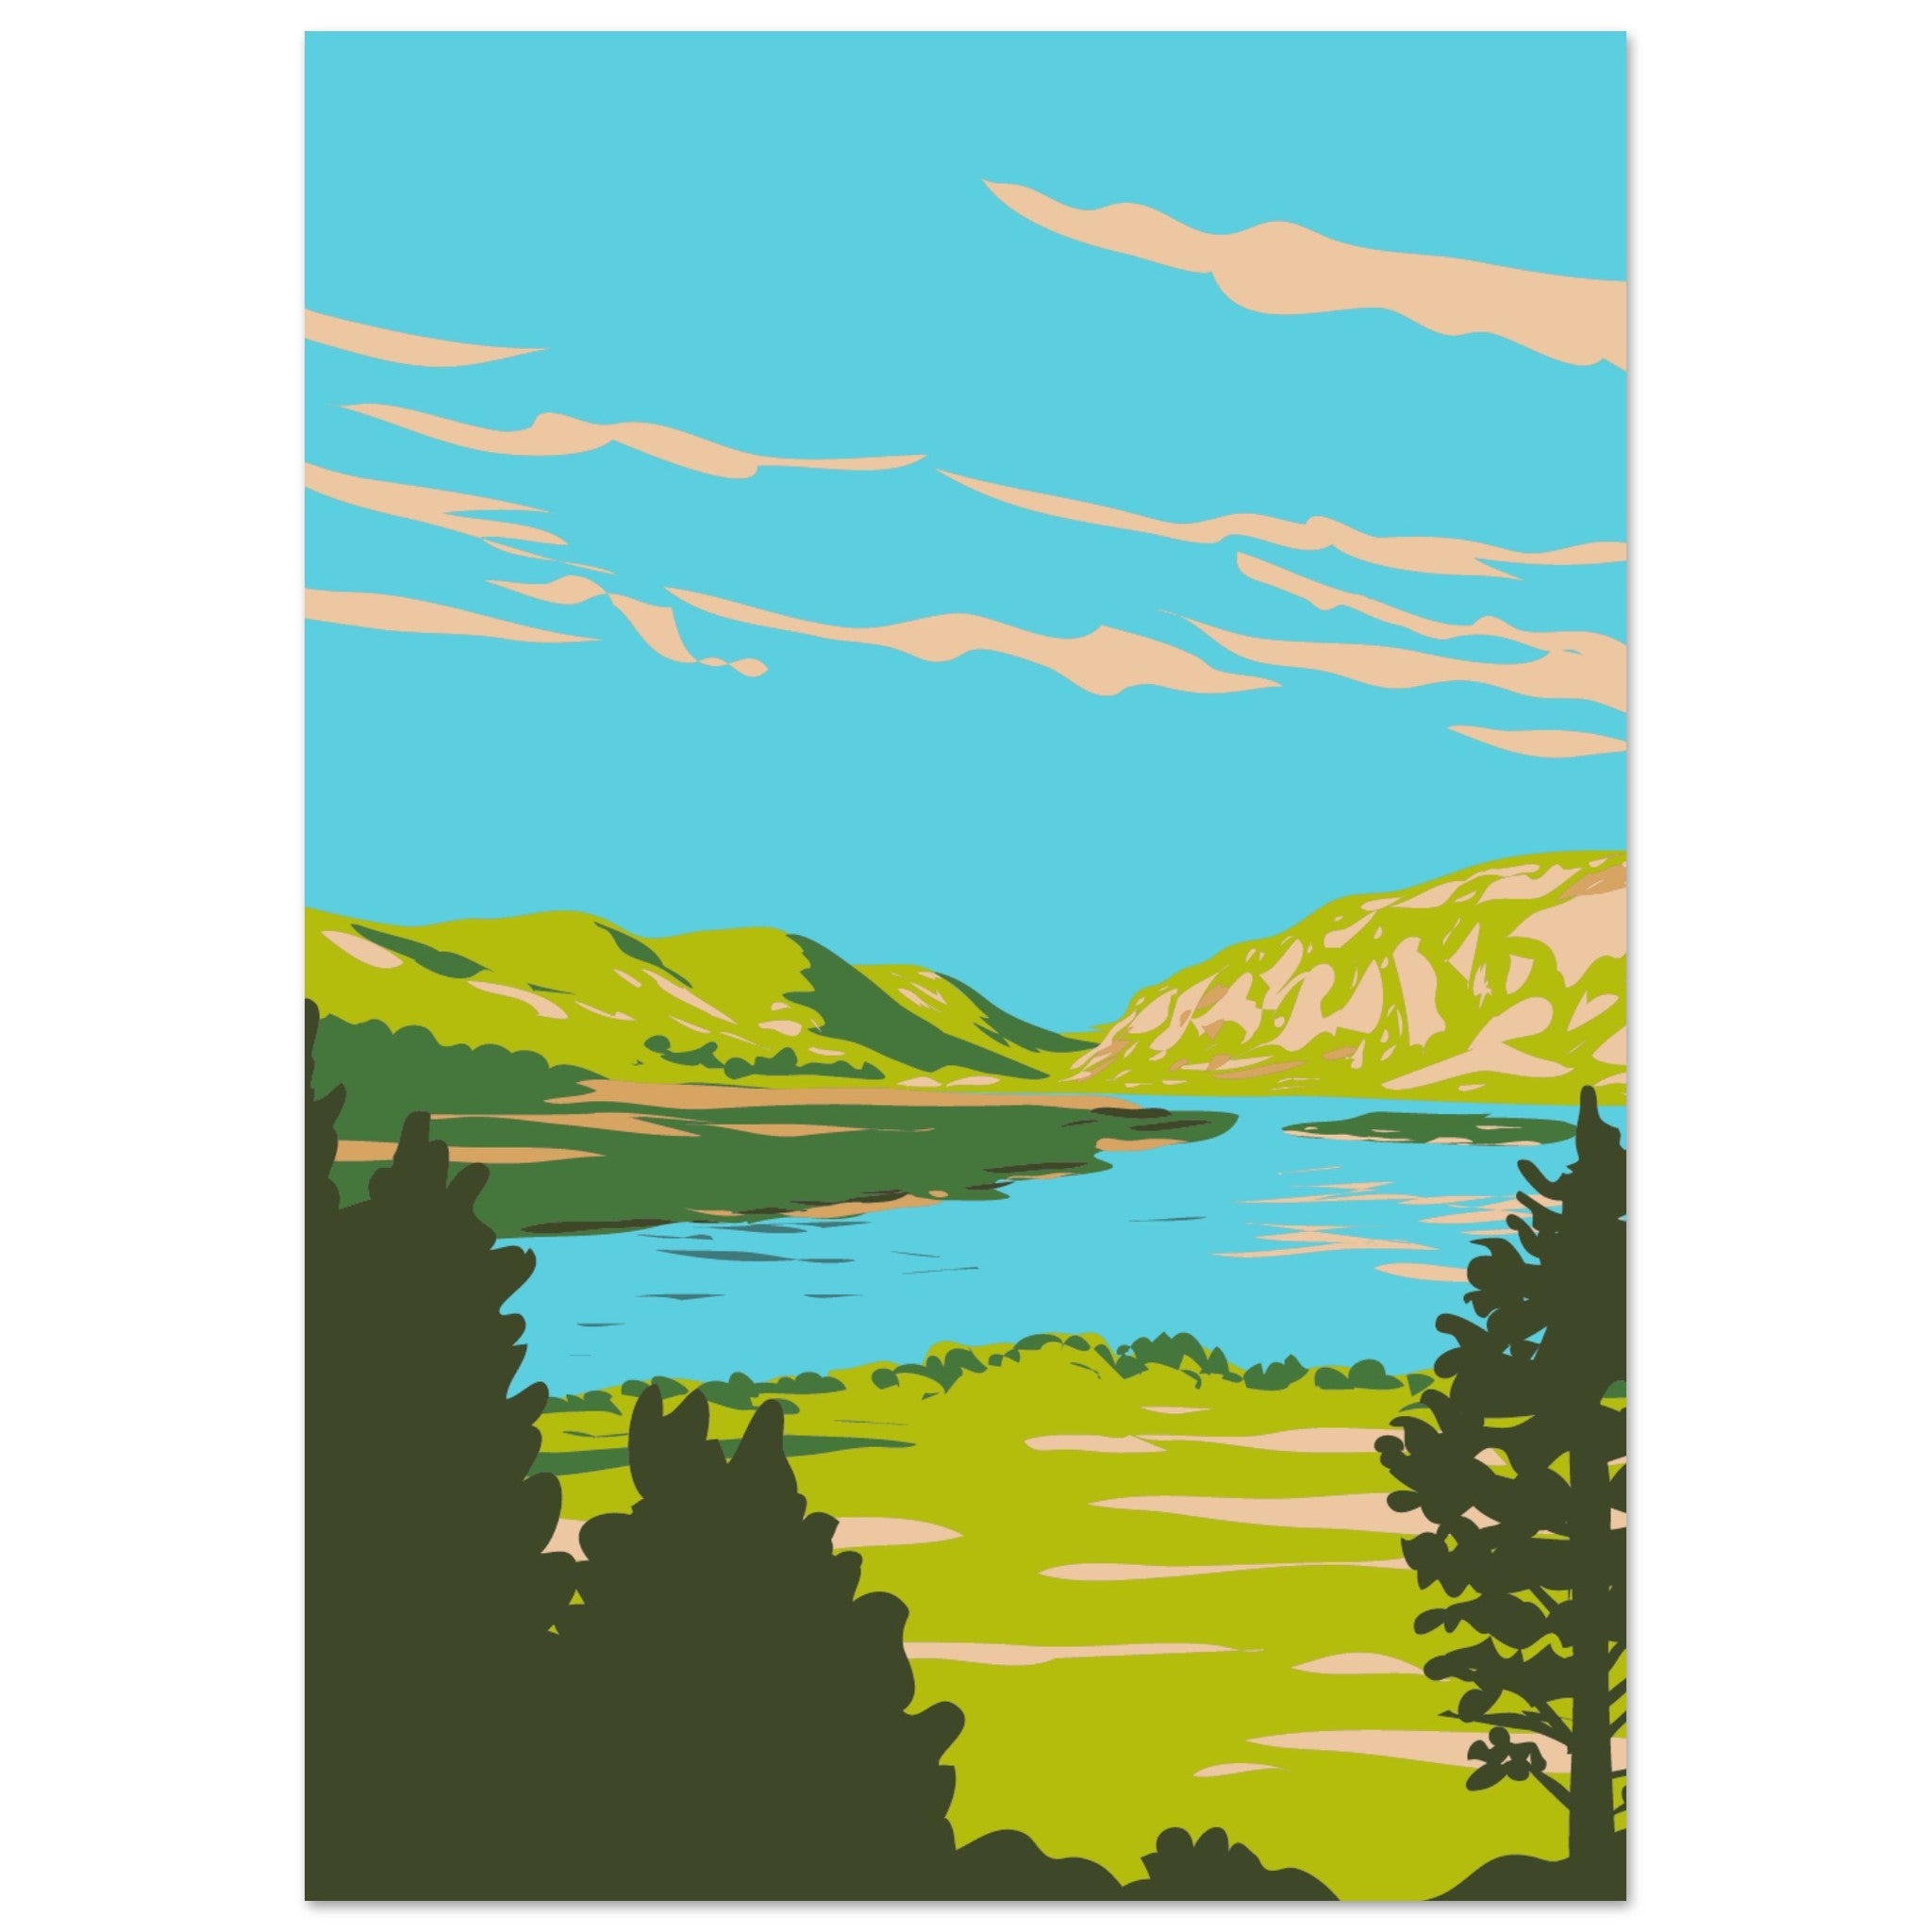 Lough Veagh at Glenveagh National Park in County Donegal Ireland Art Deco Poster